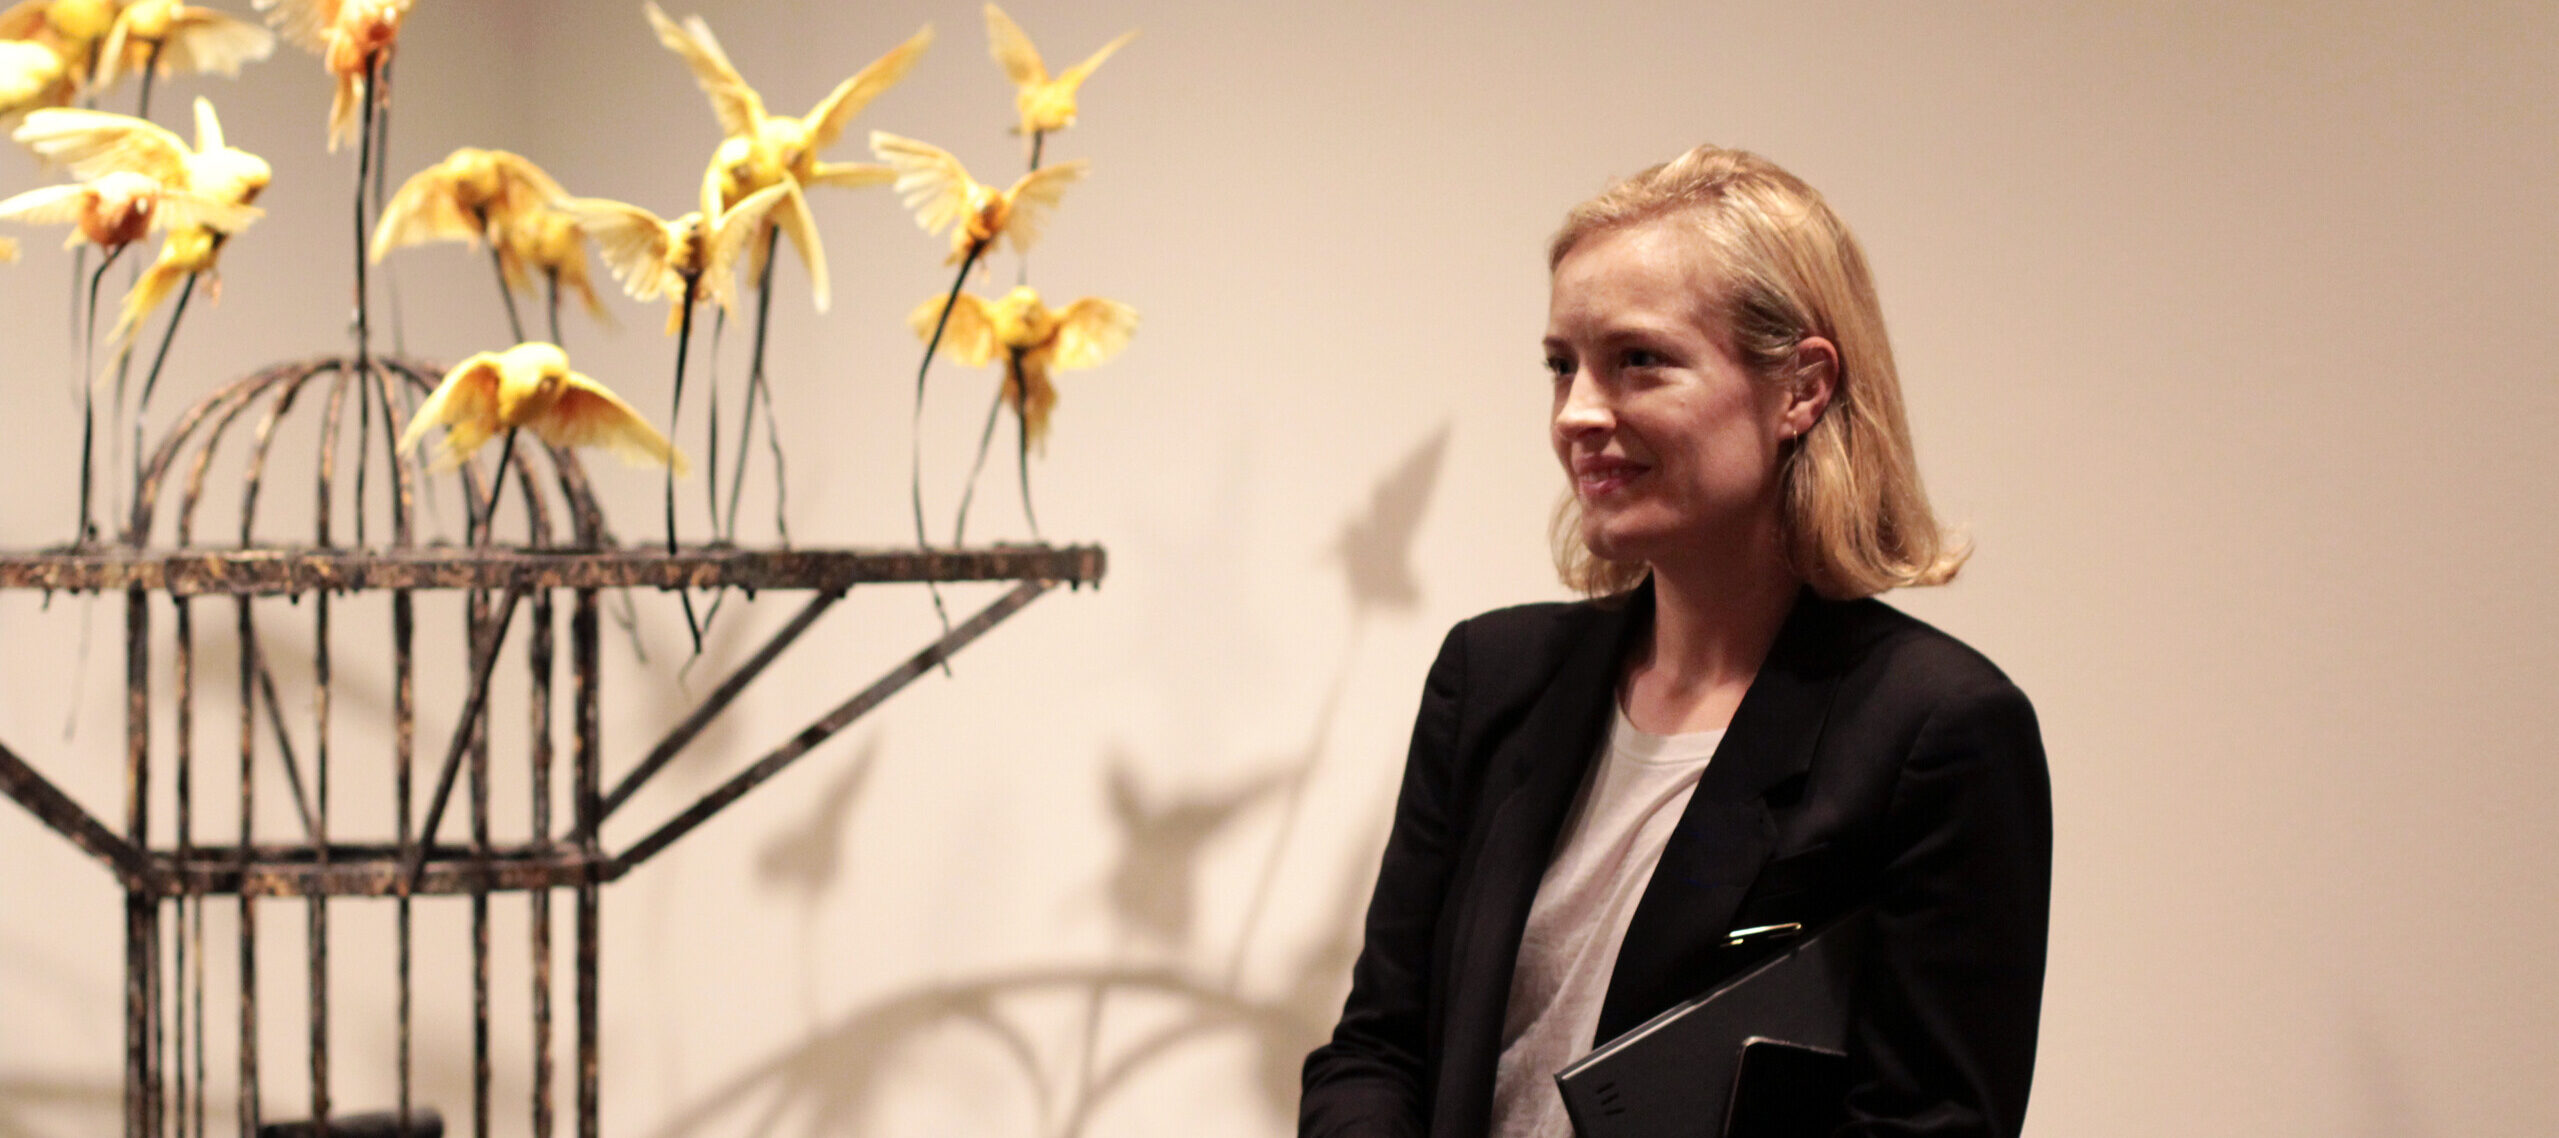 A woman with a light skin tone and short, blonde hair stands before a white wall next to a sculpture. The sculpture is a metal construction with yellow birds attached to its top.